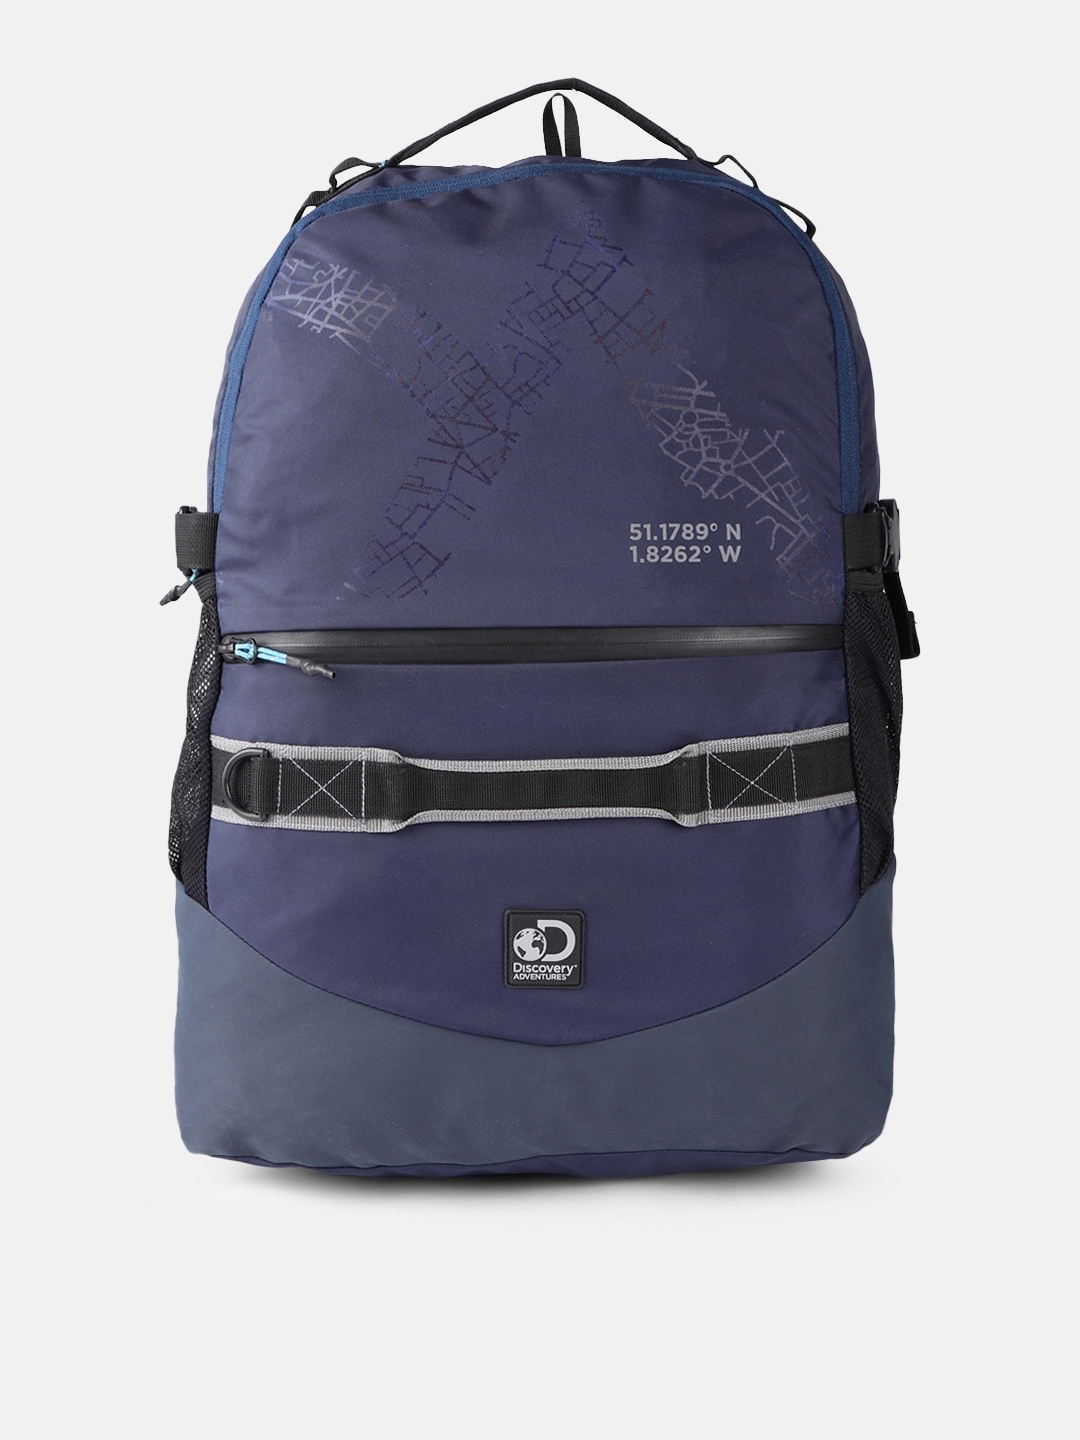 Roadster Unisex Navy Blue Discovery Trek Backpack with Compression Straps Price in India